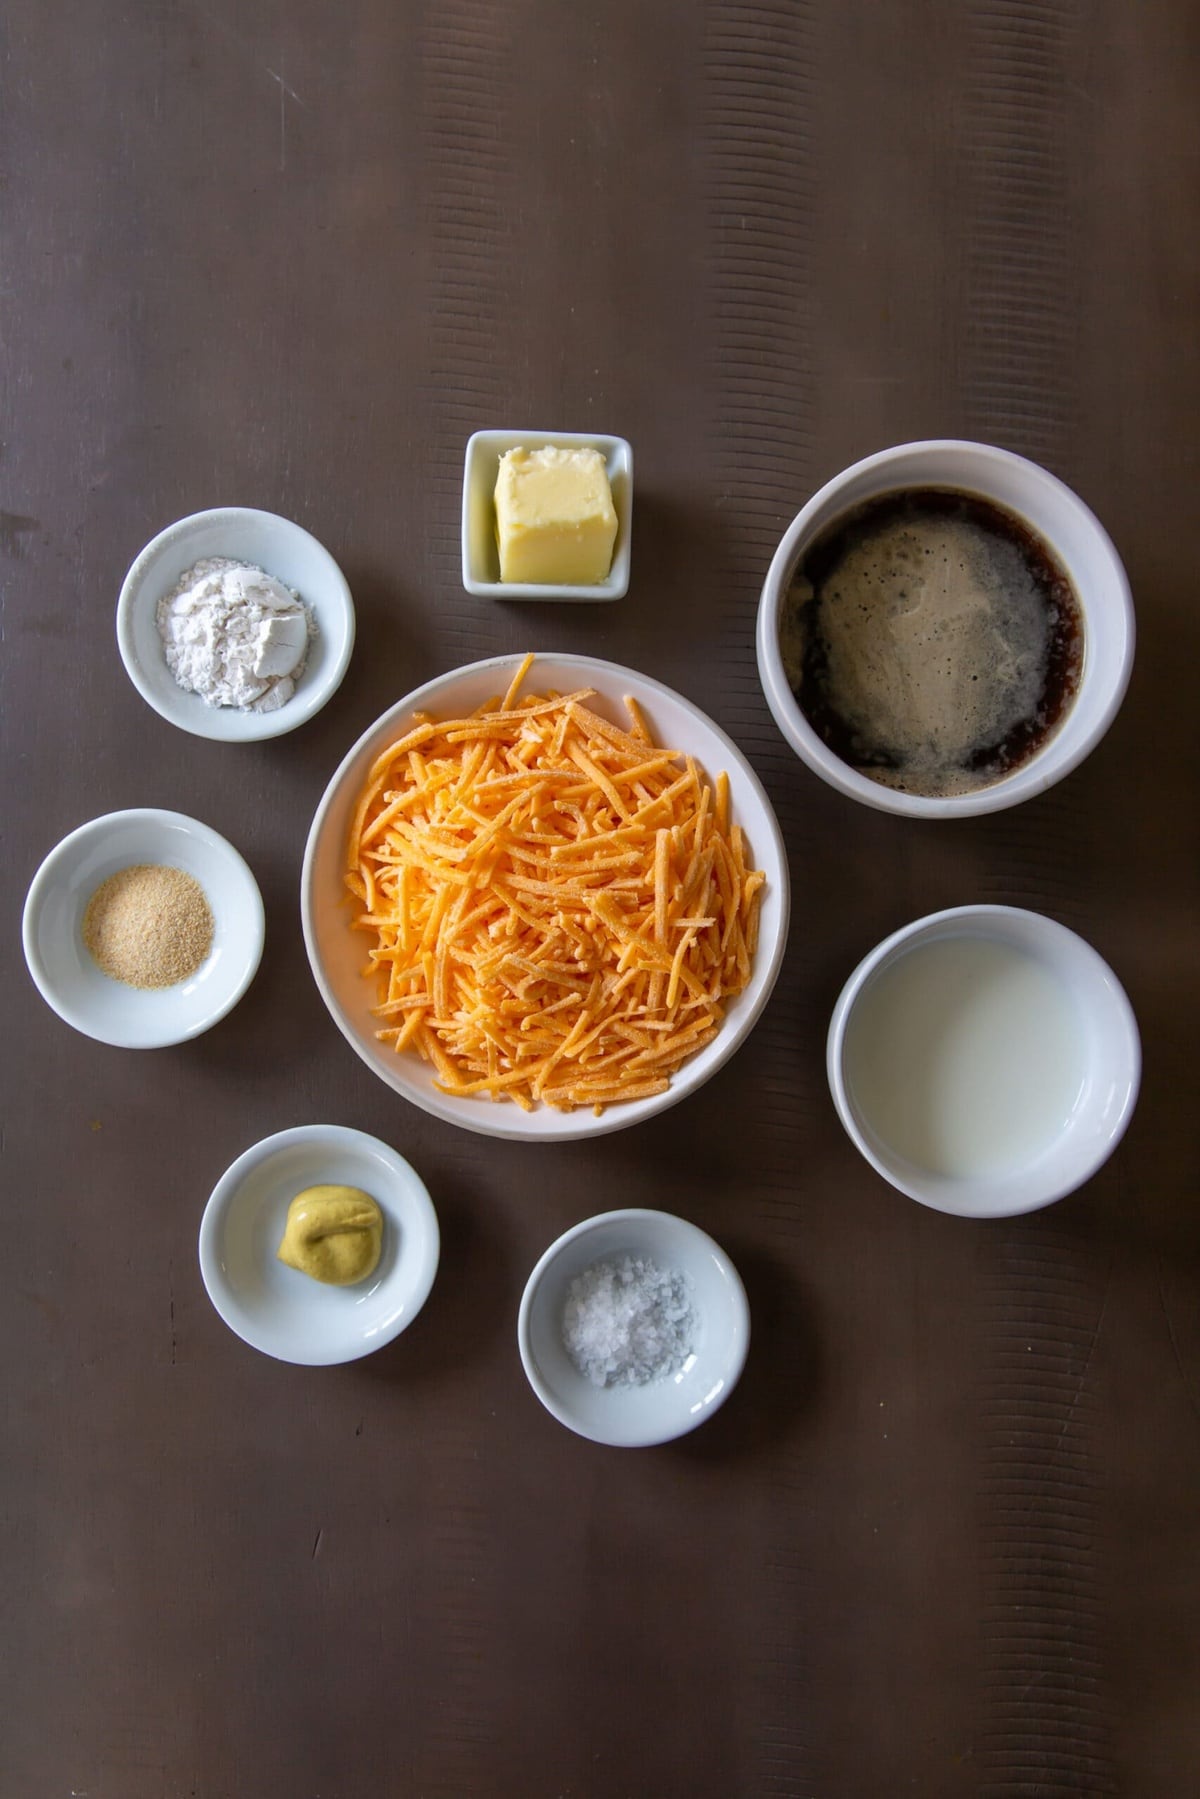 Ingredients carefully prepared for making the rich and flavorful Guinness beer cheese sauce.